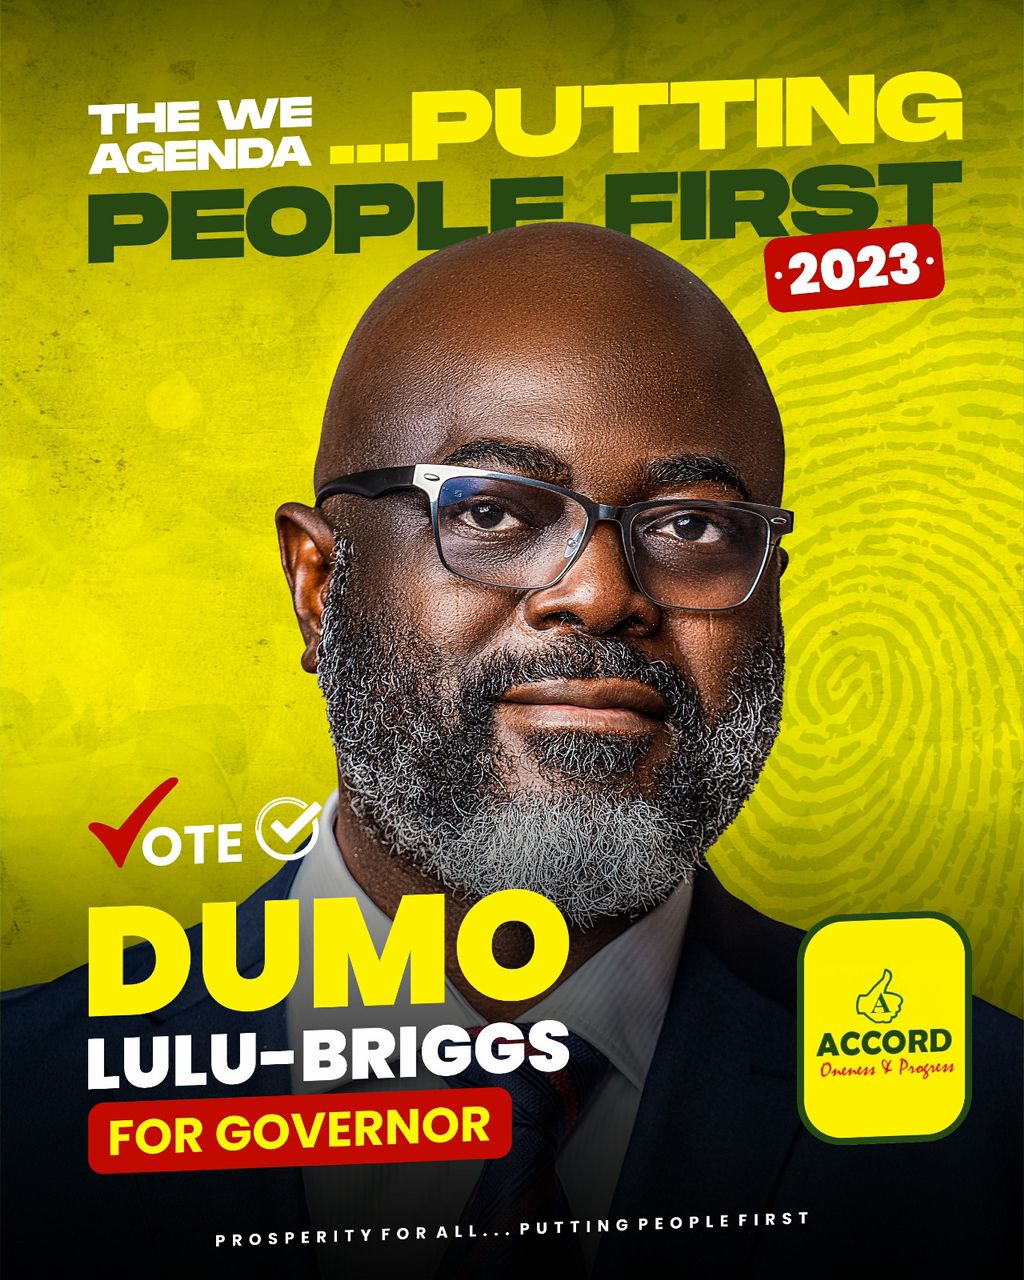 Rivers State Politics: Dumo Lulu-briggs Recommended As Rivers State Governor For 2023 Election